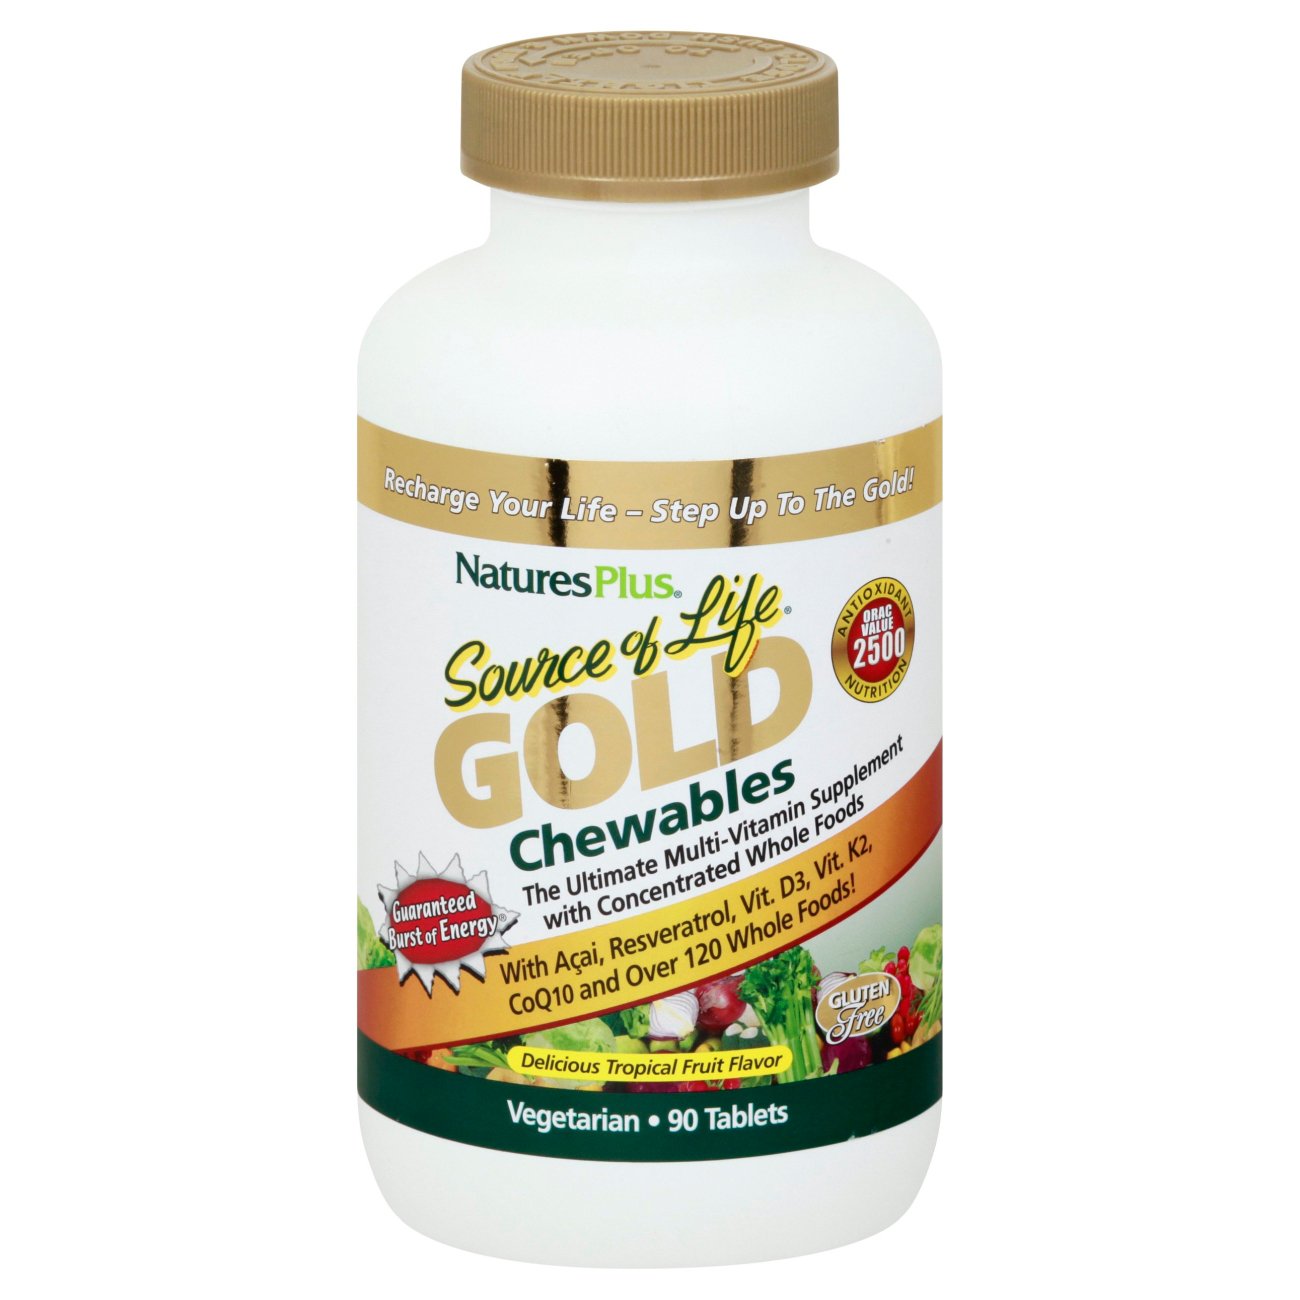 NaturesPlus Source of Life Gold Multi-Vitamin Chewable Tablets - Shop